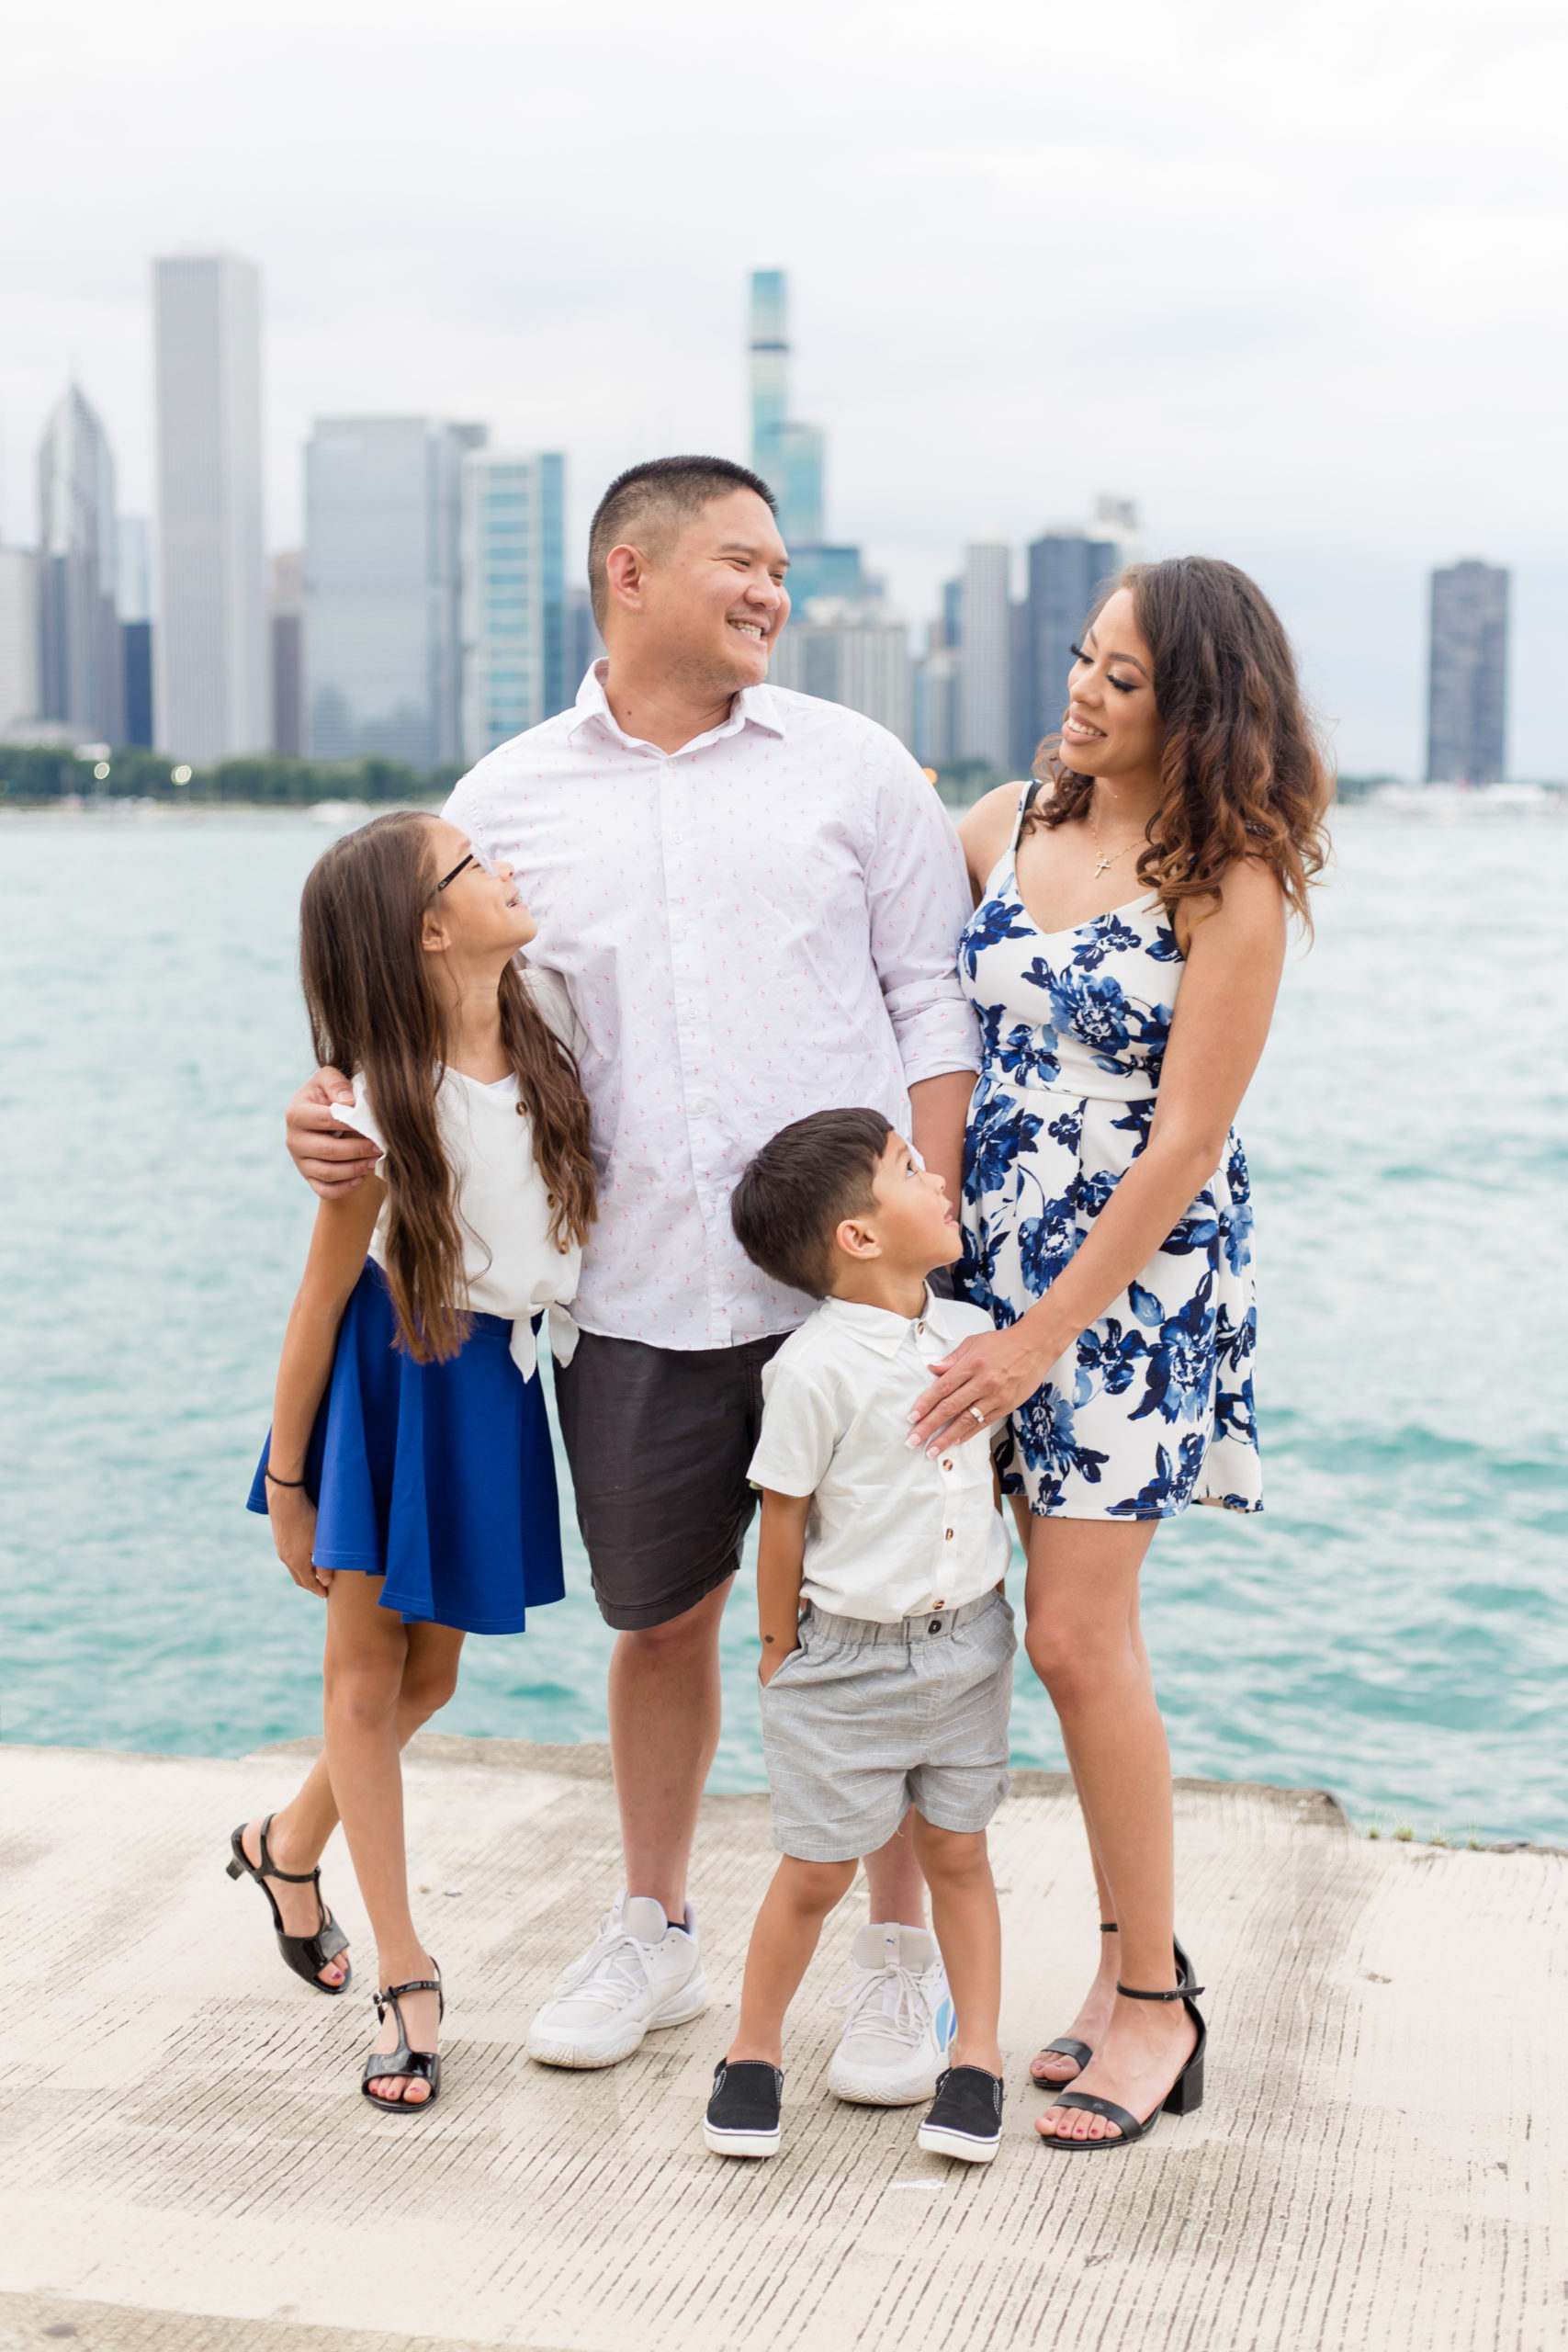 Beautiful family of 4 standing with the Chicago skyline in the back. Little girl is dressed in a white top that ties at the waist and a vibrant blue skirt. Dad is wearing a white button up shirt and grey shorts. Mom is in a sleeveless dress with blue and white floral design. Son is dressed in a white button up shirt and grey shorts.